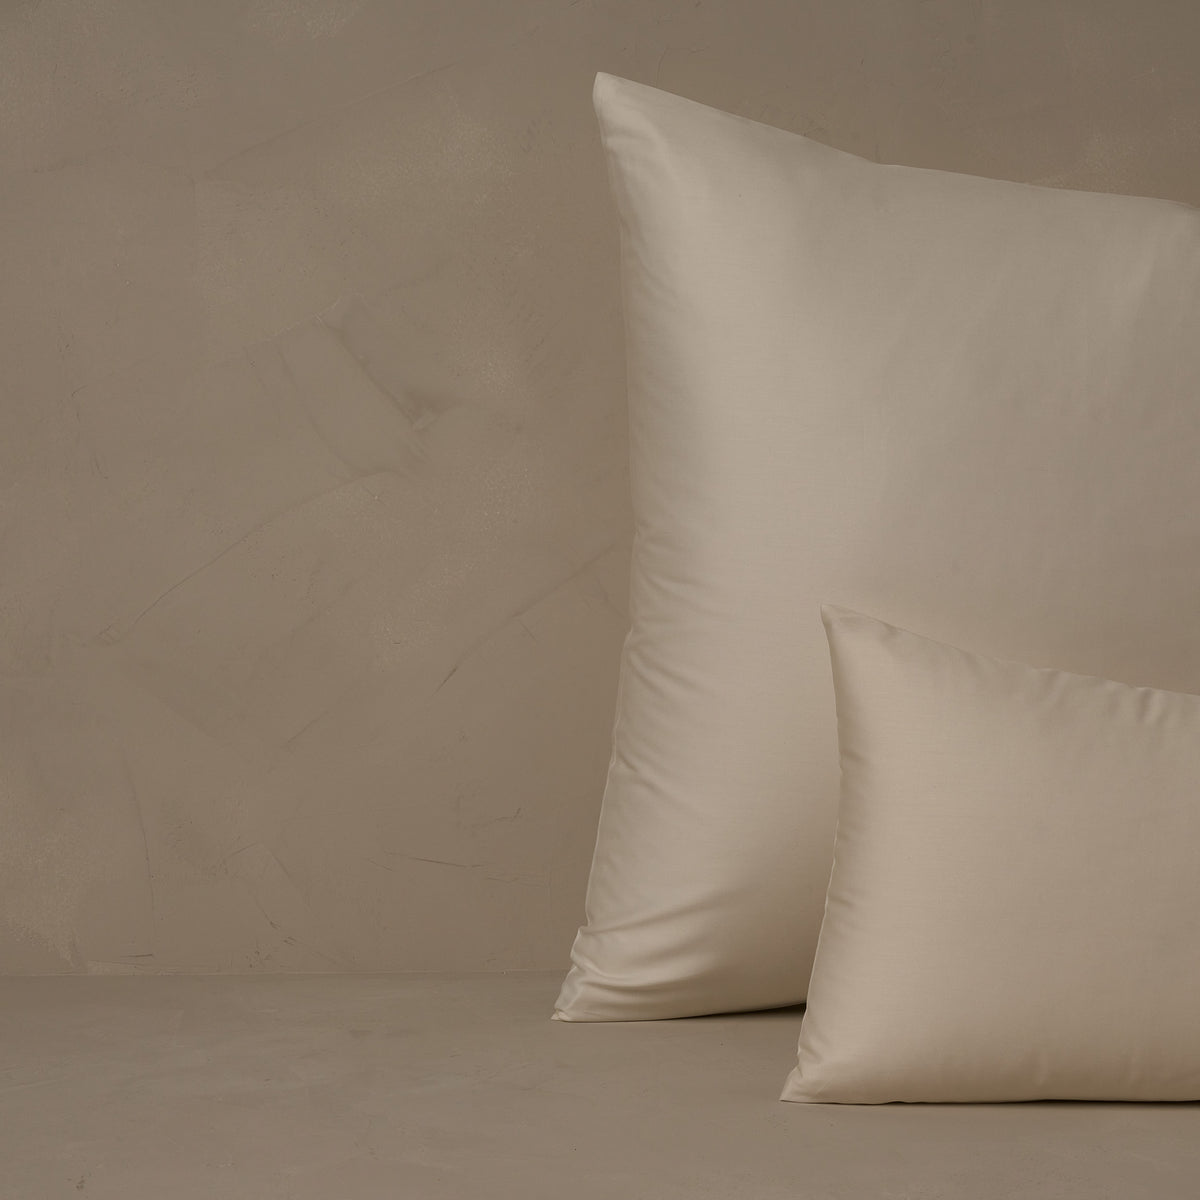 An image of a small boudoir or travel size pillow stacked in front of a large euro size pillow. The pillow cases are made of LETTO's warm and buttery Classic Cotton Sateen in color ivory. data-image-id=